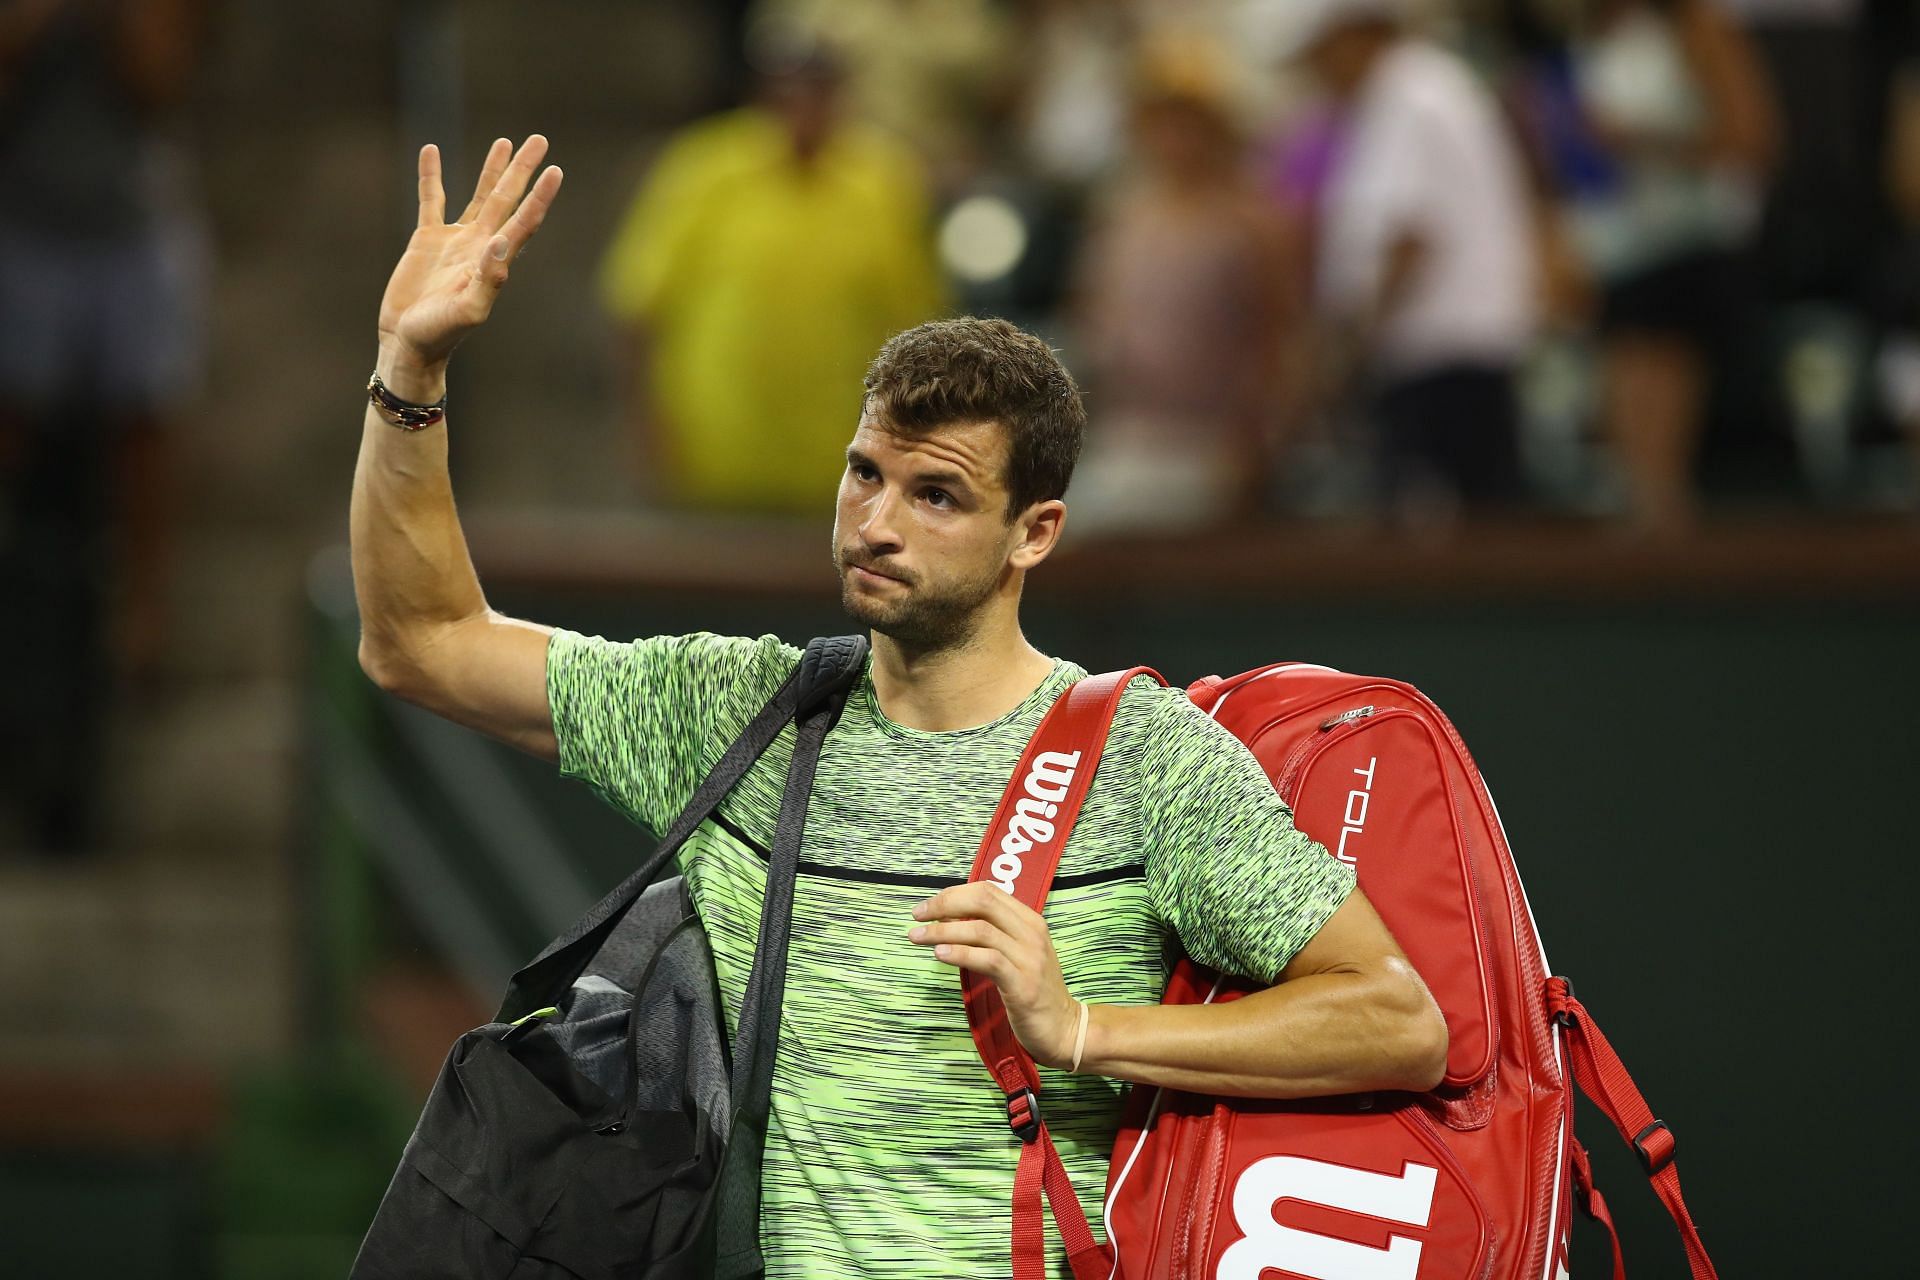 Grigor Dimitrov has been nominated for the ATP Sportsmanship award on multiple occasions